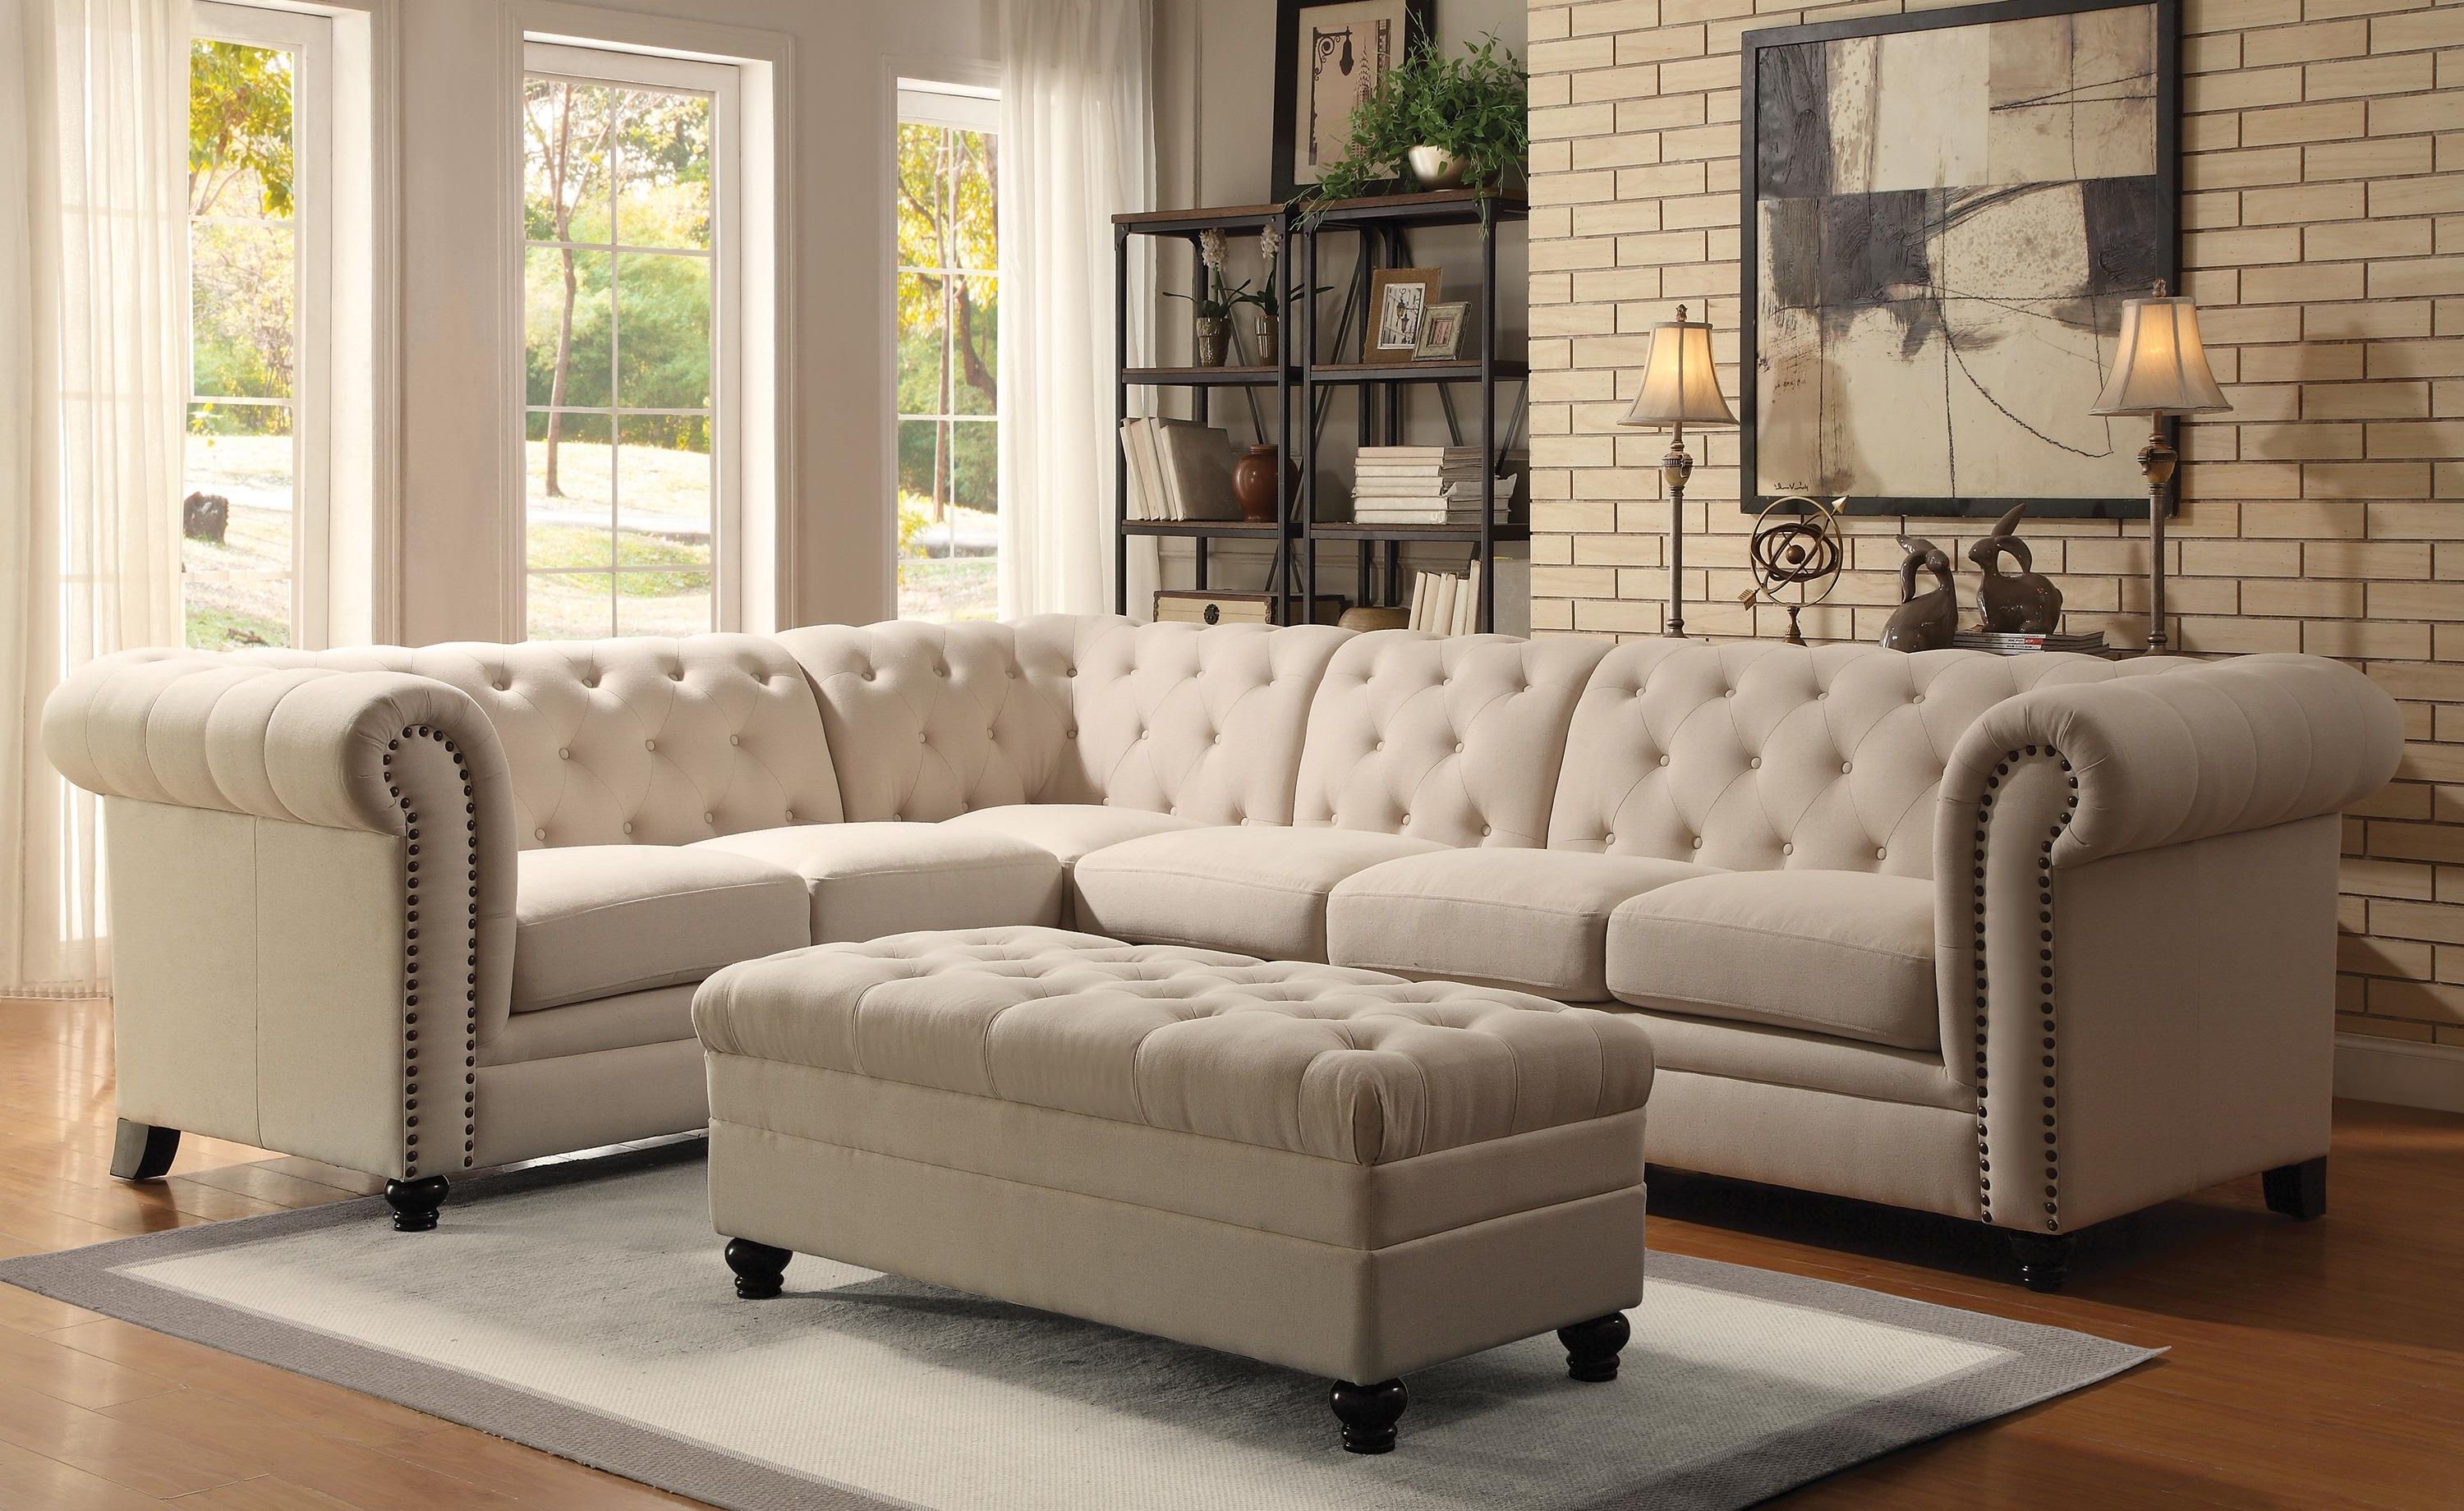 Featured Photo of 15 Best Collection of Tufted Sectional Sofas with Chaise